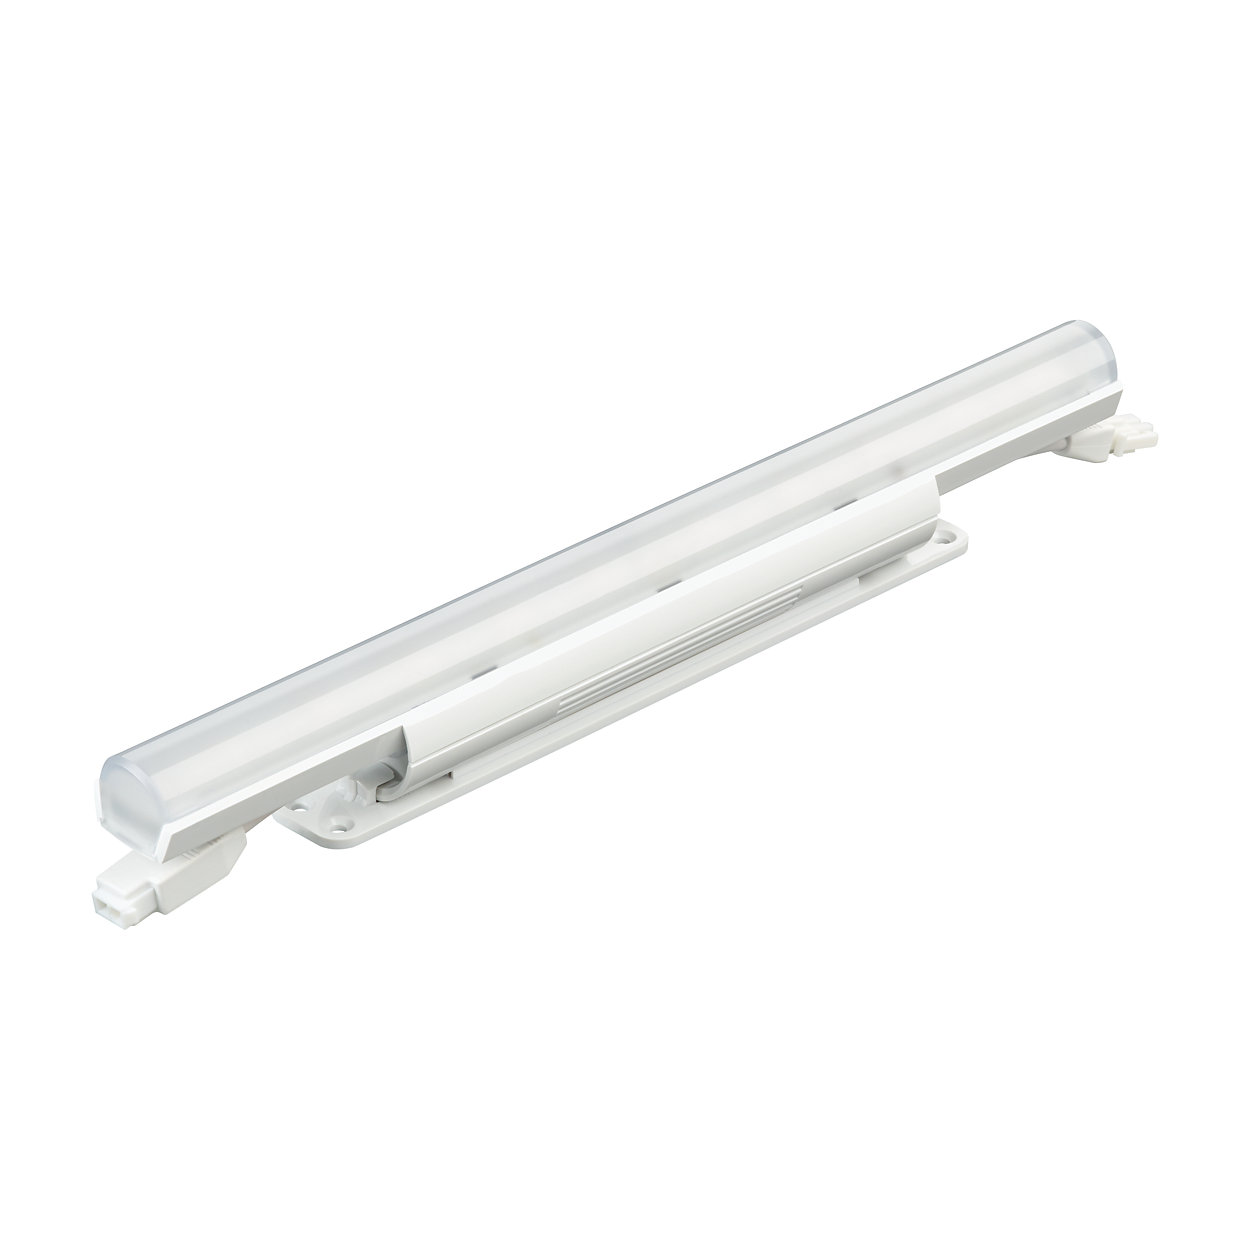 eW Cove QLX Powercore – Performance interior linear LED cove and accent luminaire with solid white light